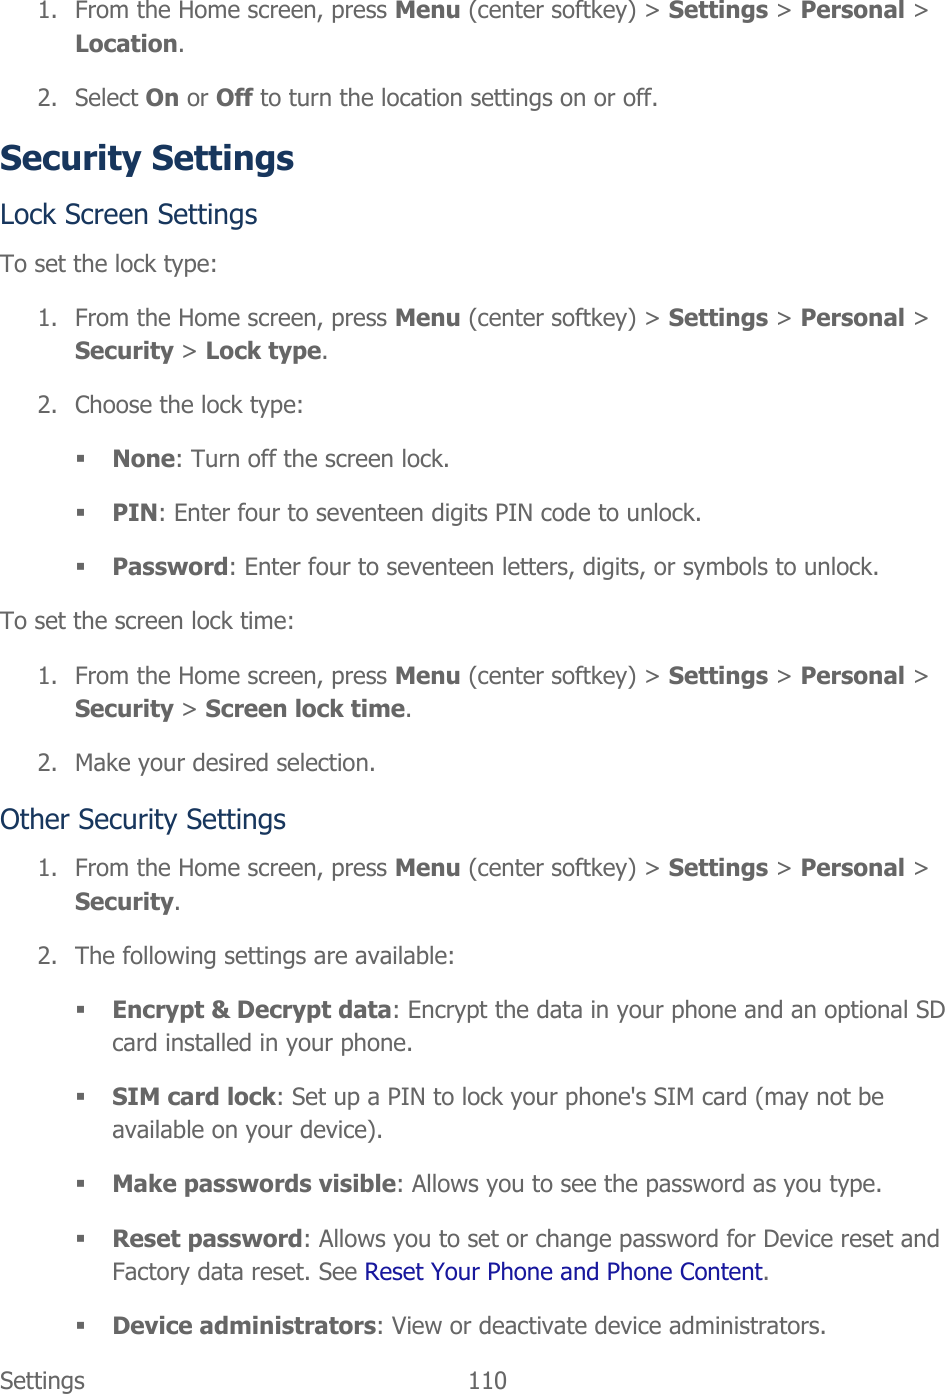  Settings  110   1. From the Home screen, press Menu (center softkey) &gt; Settings &gt; Personal &gt; Location. 2. Select On or Off to turn the location settings on or off. Security Settings Lock Screen Settings To set the lock type: 1. From the Home screen, press Menu (center softkey) &gt; Settings &gt; Personal &gt; Security &gt; Lock type. 2. Choose the lock type:  None: Turn off the screen lock.  PIN: Enter four to seventeen digits PIN code to unlock.  Password: Enter four to seventeen letters, digits, or symbols to unlock. To set the screen lock time: 1. From the Home screen, press Menu (center softkey) &gt; Settings &gt; Personal &gt; Security &gt; Screen lock time. 2. Make your desired selection. Other Security Settings 1. From the Home screen, press Menu (center softkey) &gt; Settings &gt; Personal &gt; Security. 2. The following settings are available:  Encrypt &amp; Decrypt data: Encrypt the data in your phone and an optional SD card installed in your phone.  SIM card lock: Set up a PIN to lock your phone&apos;s SIM card (may not be available on your device).  Make passwords visible: Allows you to see the password as you type.  Reset password: Allows you to set or change password for Device reset and Factory data reset. See Reset Your Phone and Phone Content.  Device administrators: View or deactivate device administrators. 